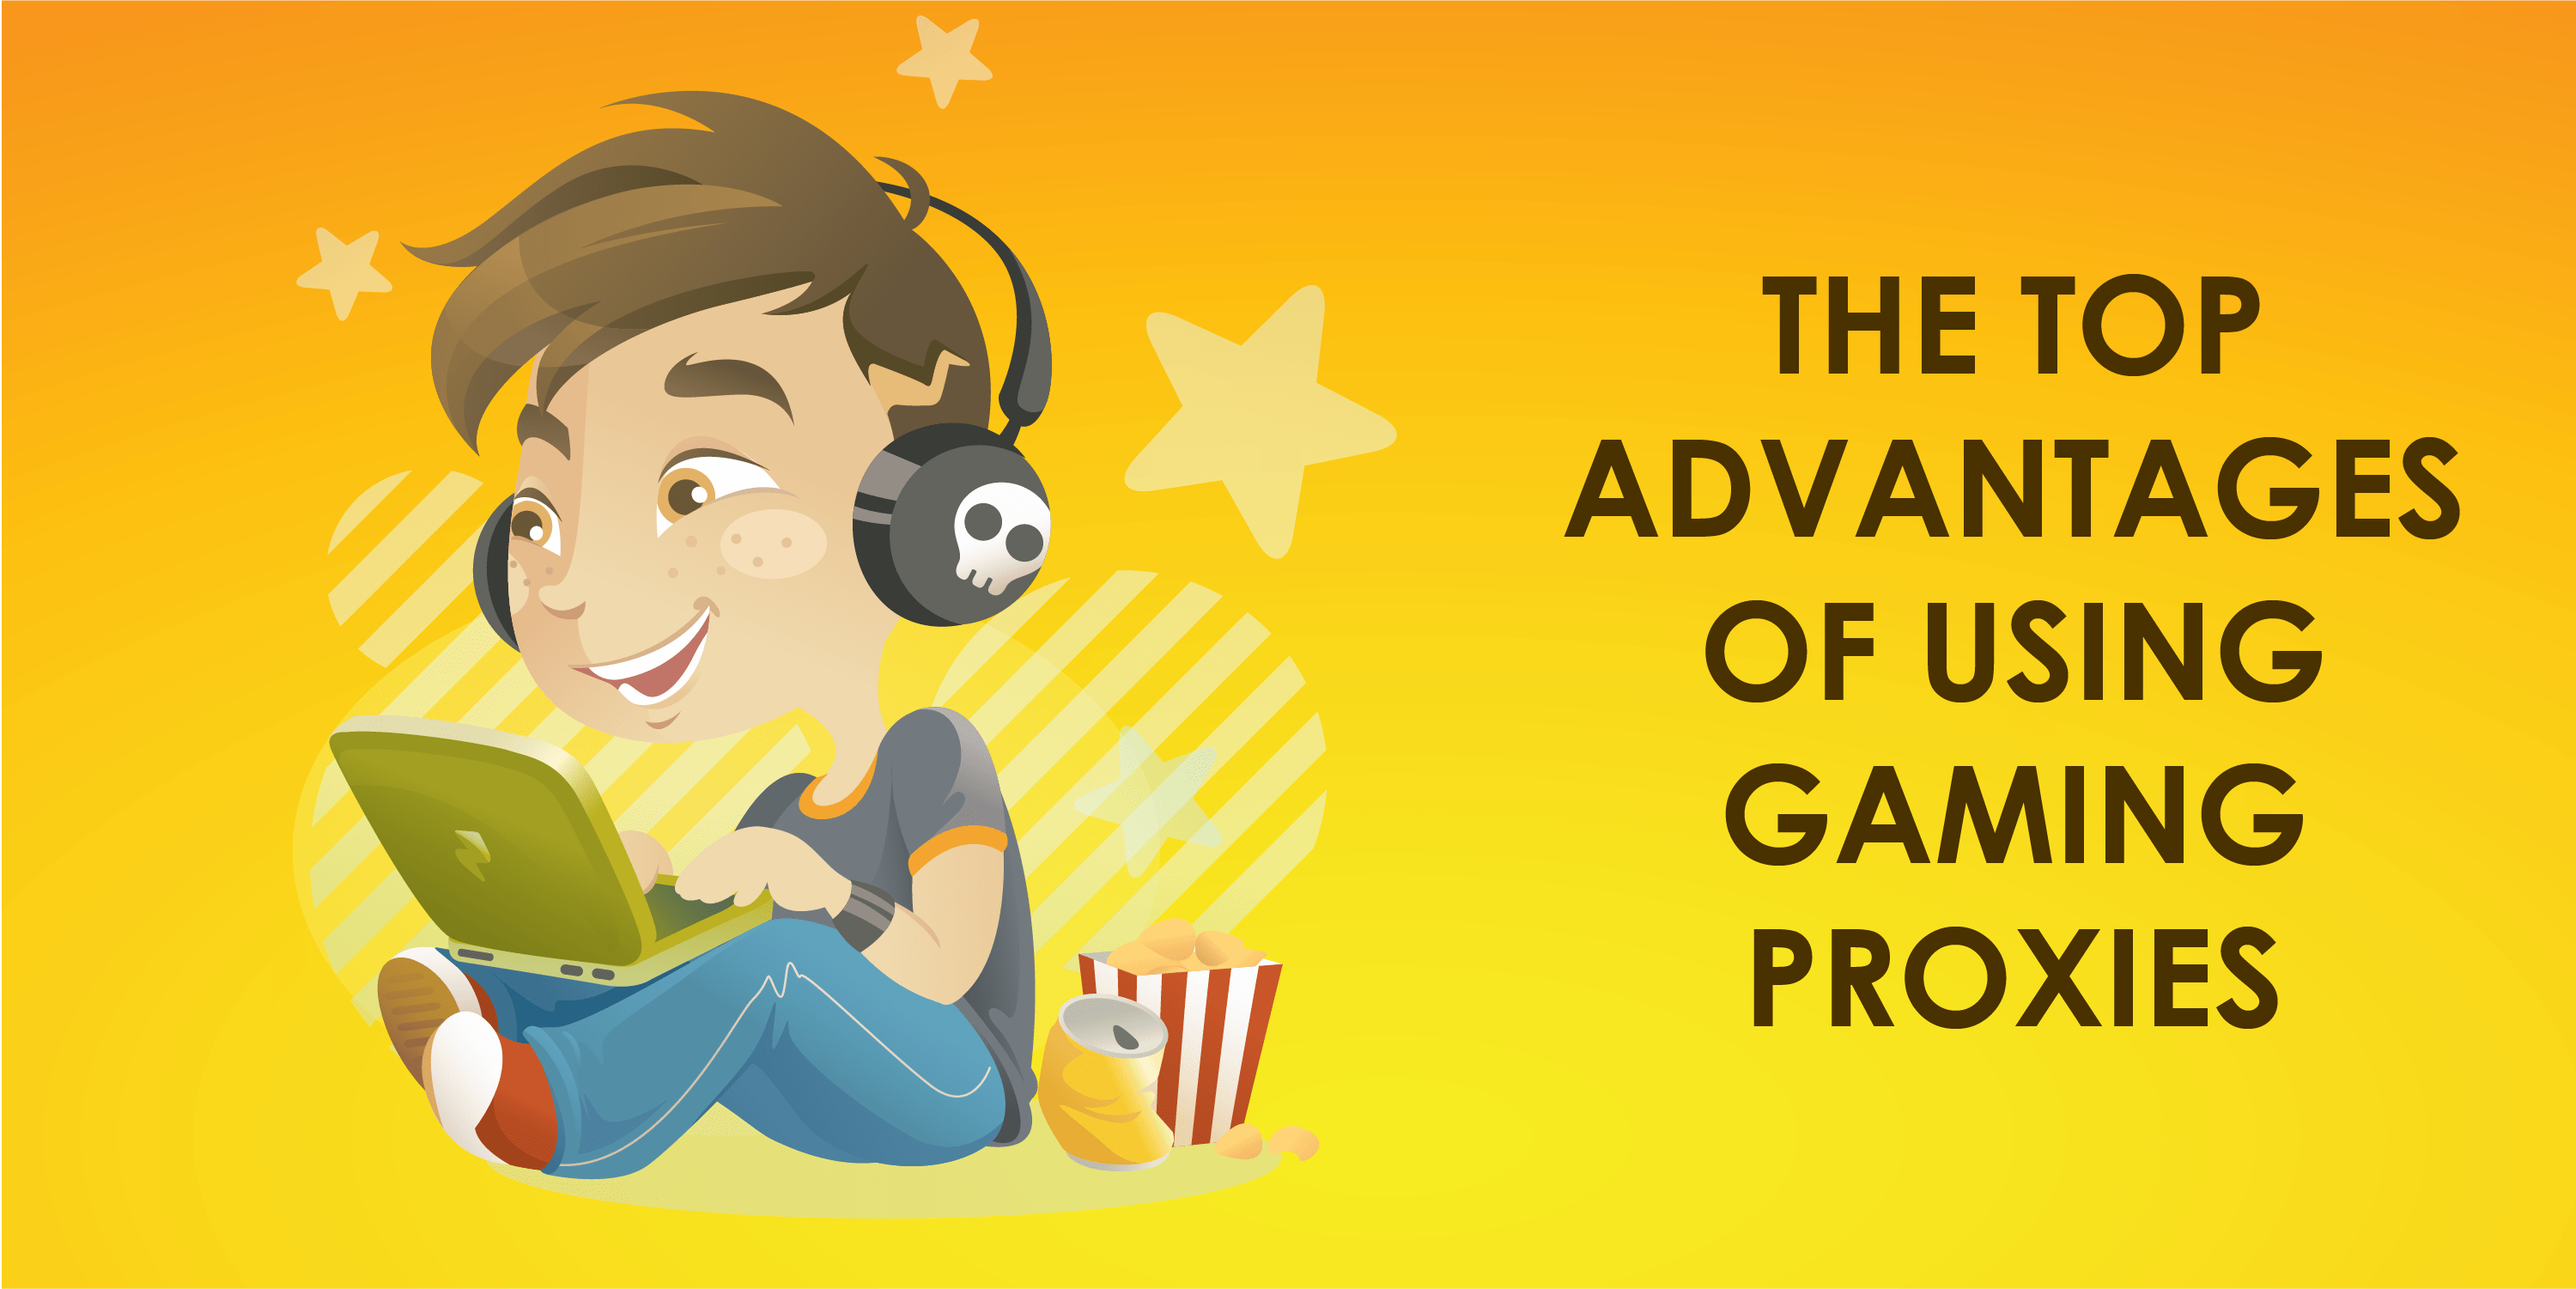 THE TOP ADVANTAGES OF USING GAMING PROXIES 